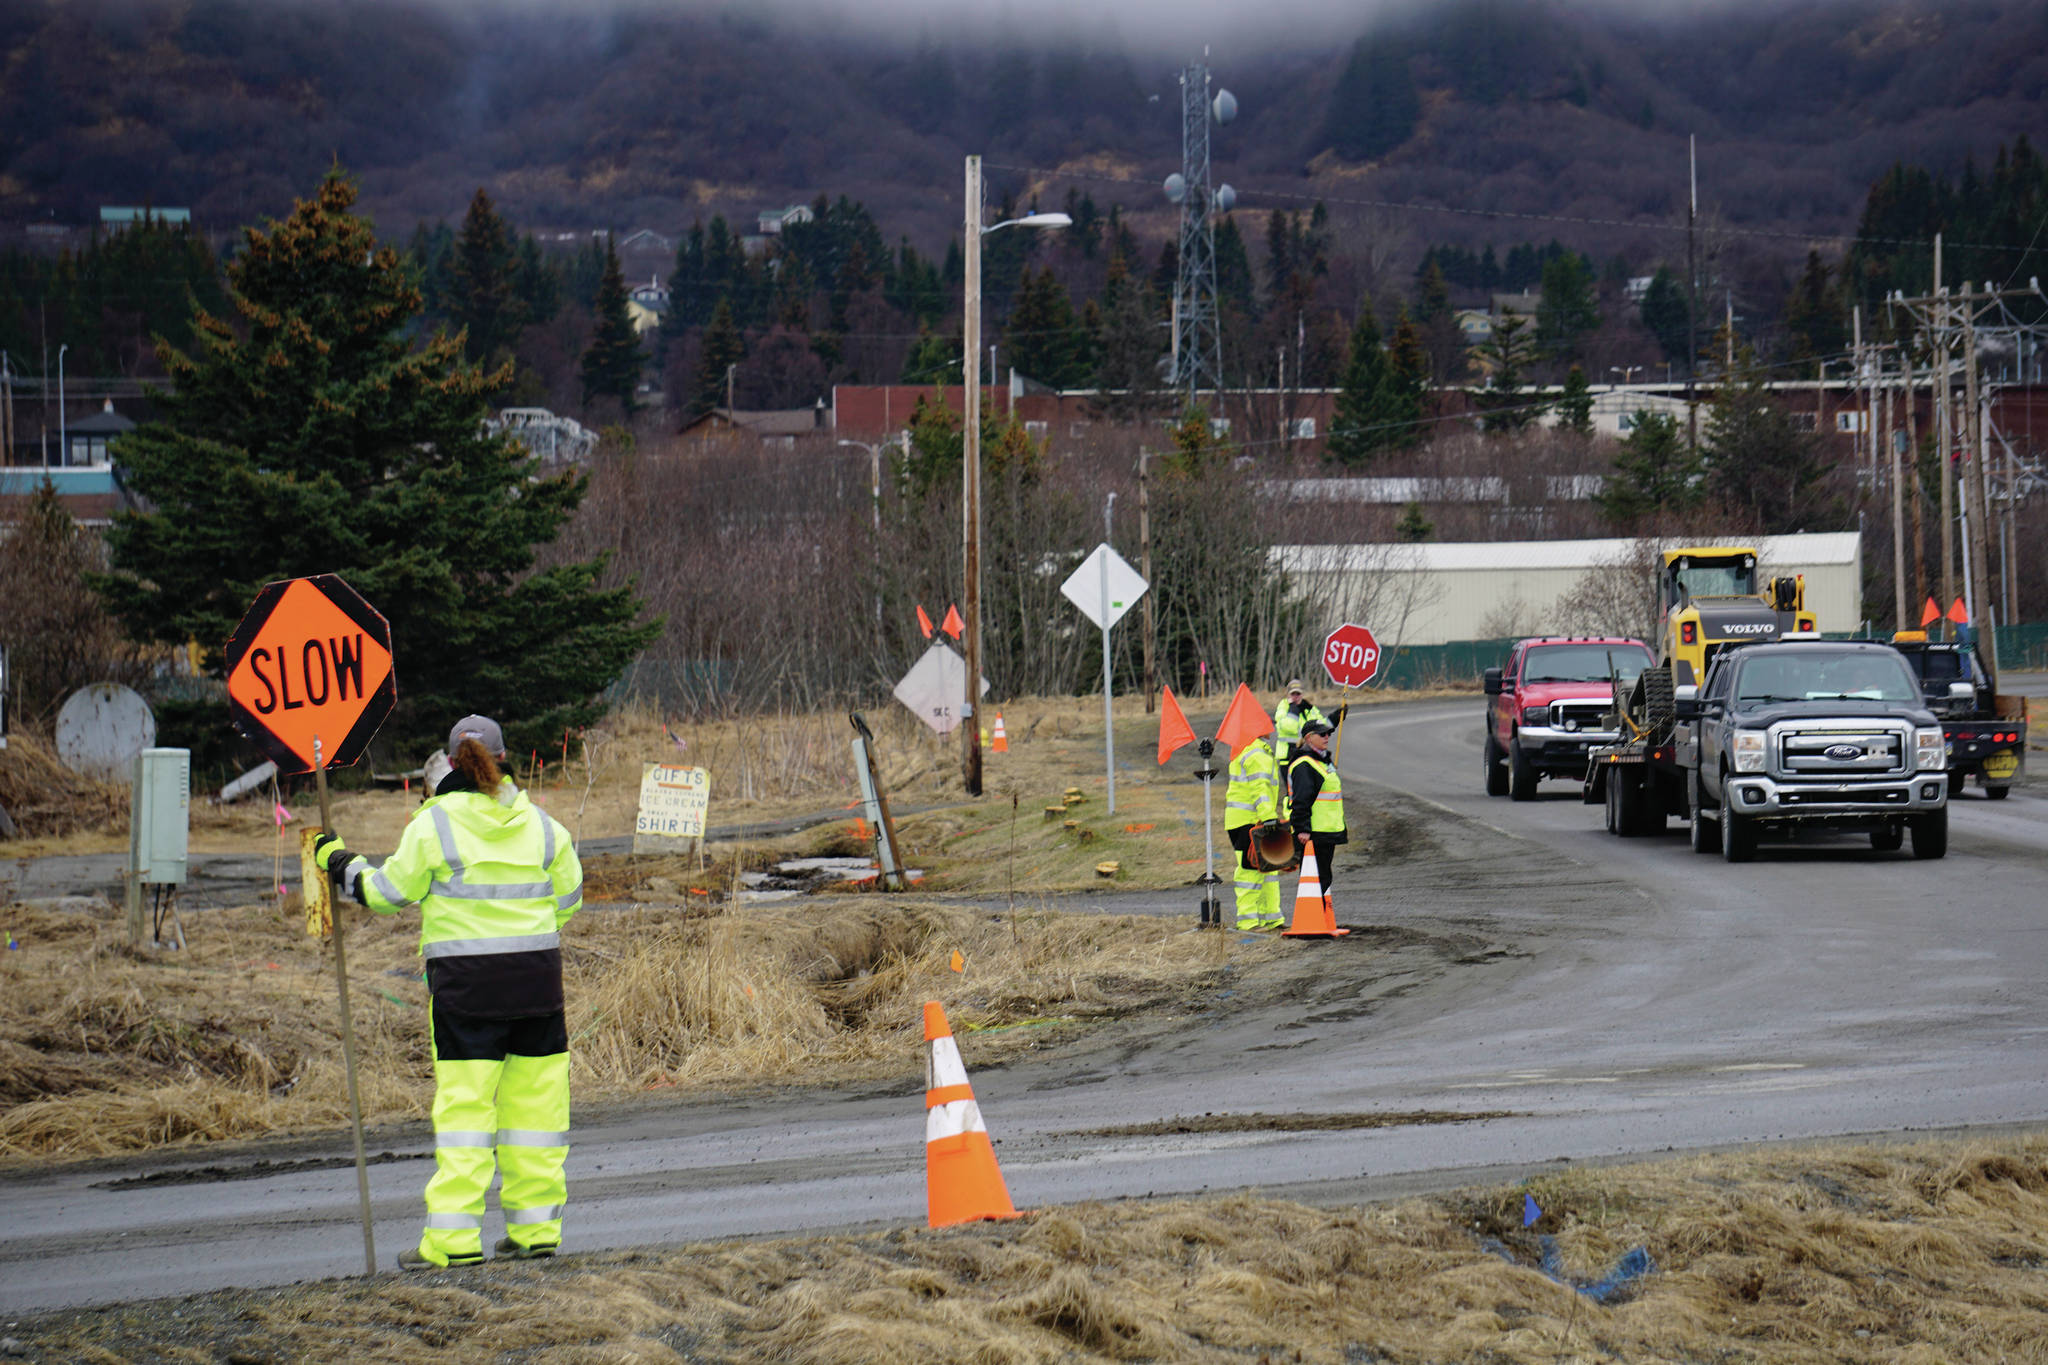 Flaggers control traffic on Friday, April 23, 2021, during preliminary construction work on Lake Street in Homer, Alaska. Rehabilitation work will be done on the street this spring and summer. (Photo by Michael Armstrong/Homer News)